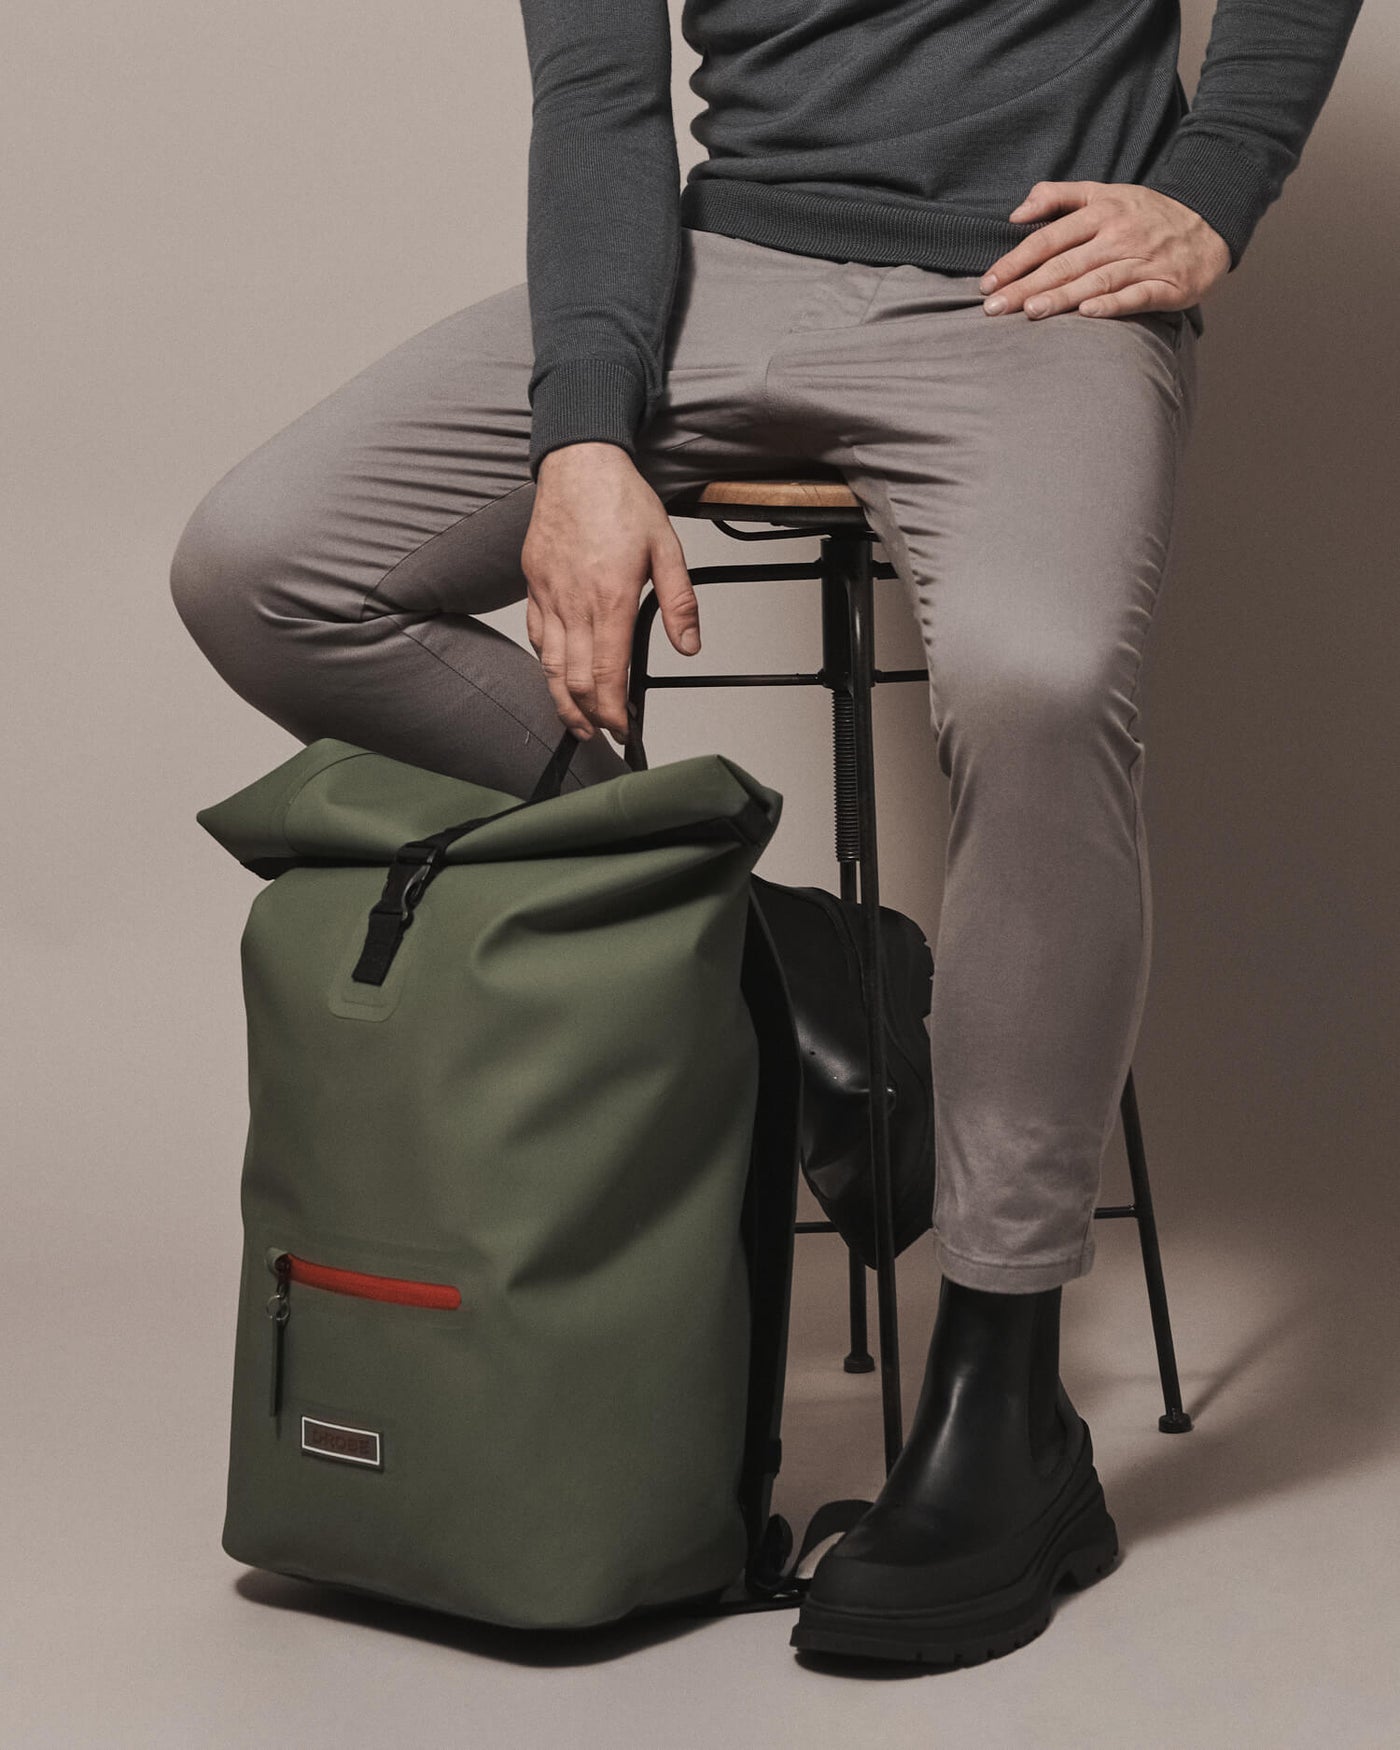 Model with our moss green roll-top rucksack. This rucksack is a must-have for any sport Robe wearer, commuter and traveller. Made from durable, waterproof and sustainable TPU and fitted with extra storage.